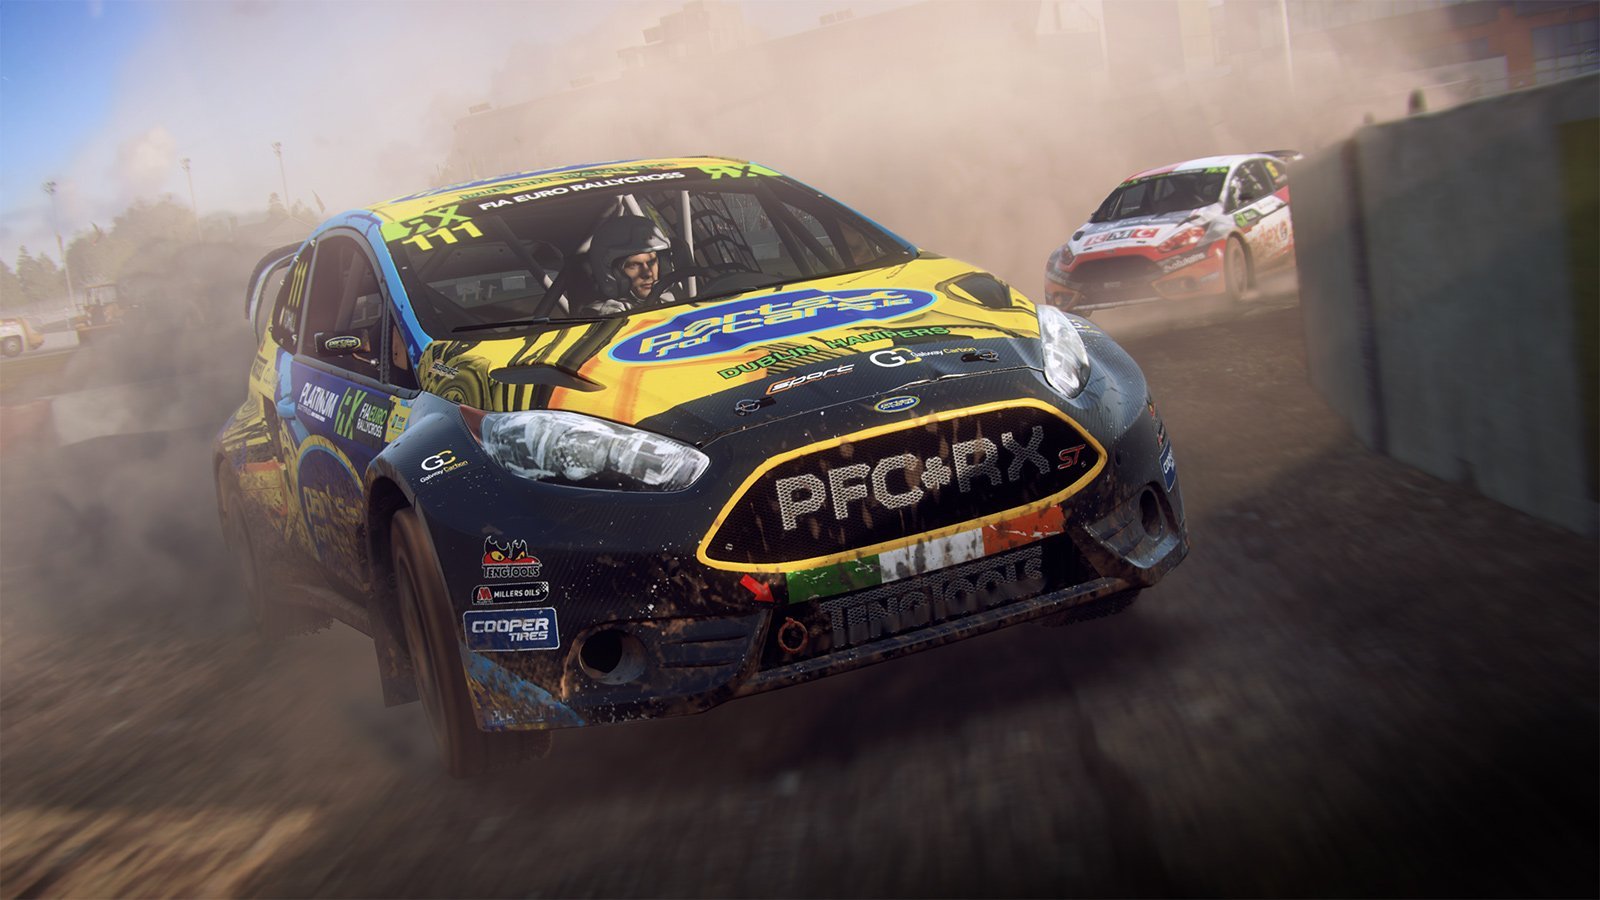 MG Motor UK launches in-game advertising in DiRT Rally 2.0 - Netimperative